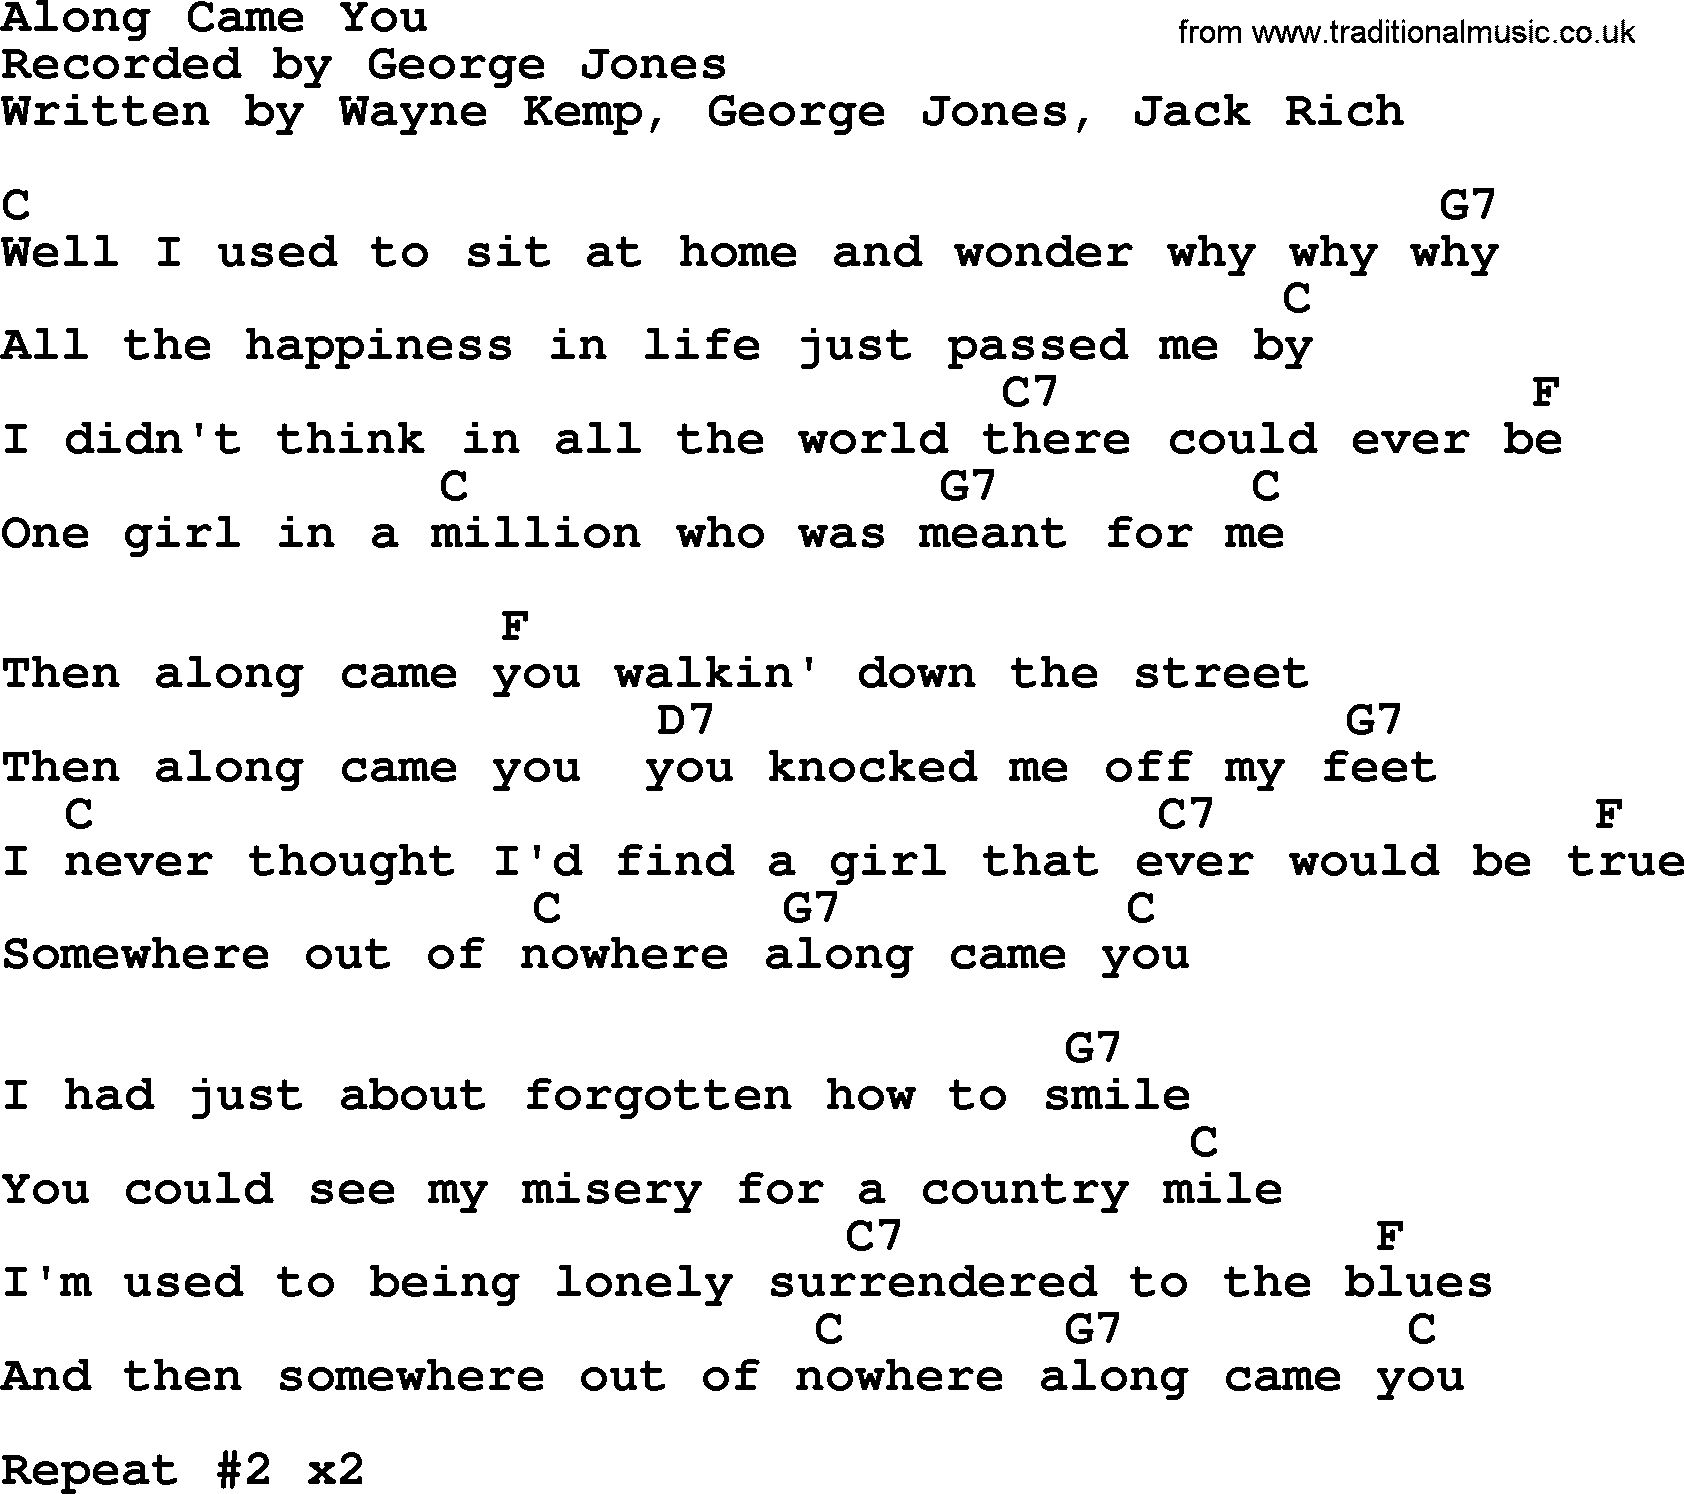 George Jones song: Along Came You, lyrics and chords